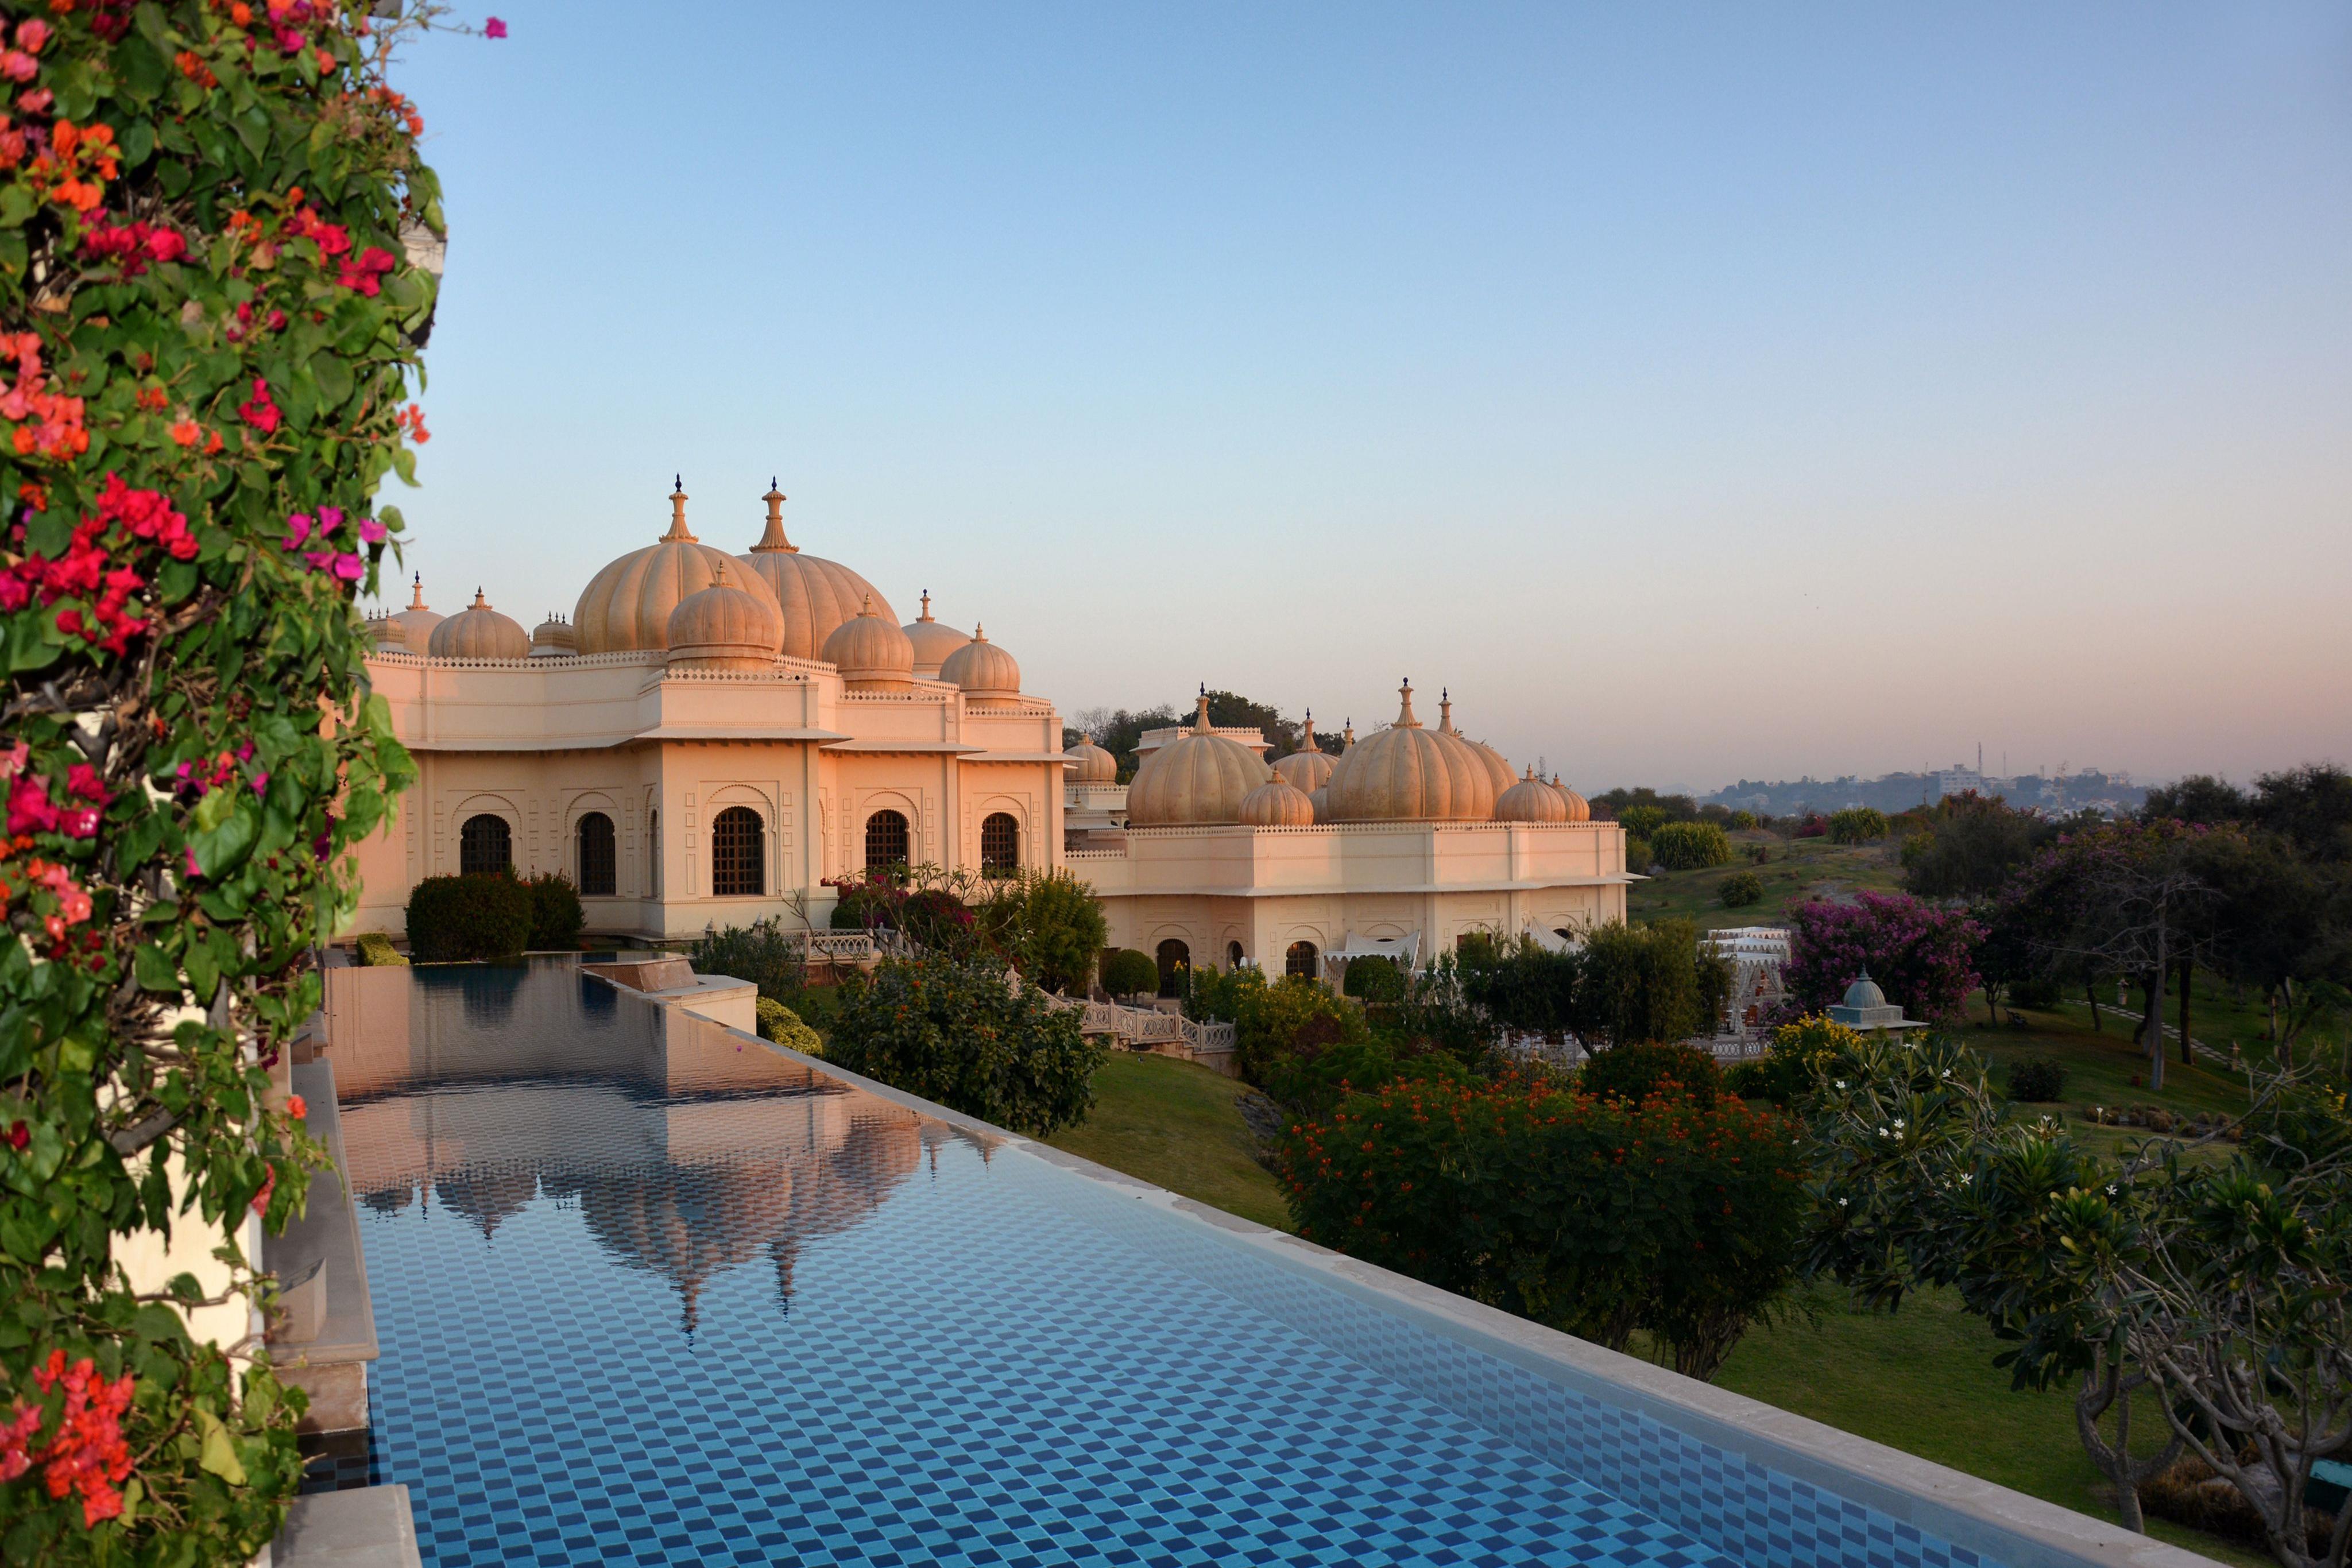 Infinity pool at the Oberoi Udaivilas Hotel in Udaipur, India.